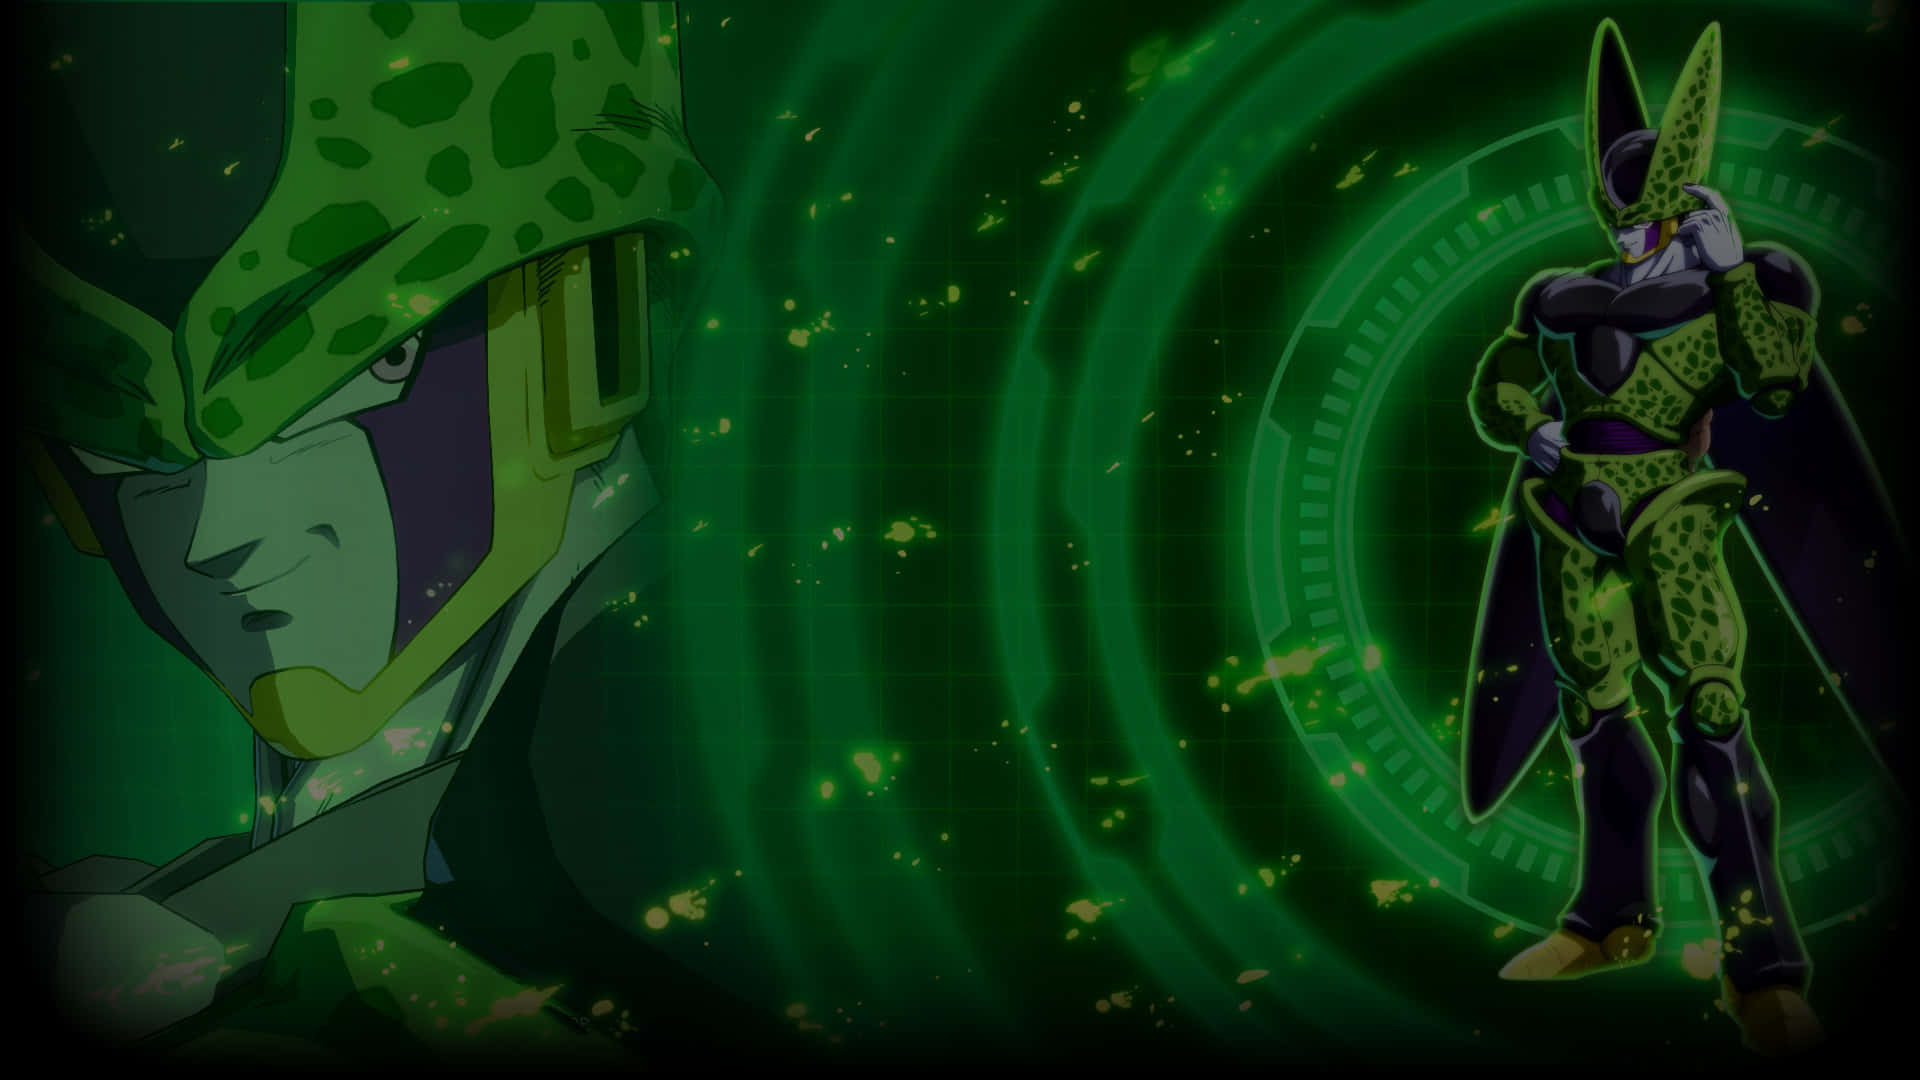 The epic Cell Games!" Wallpaper